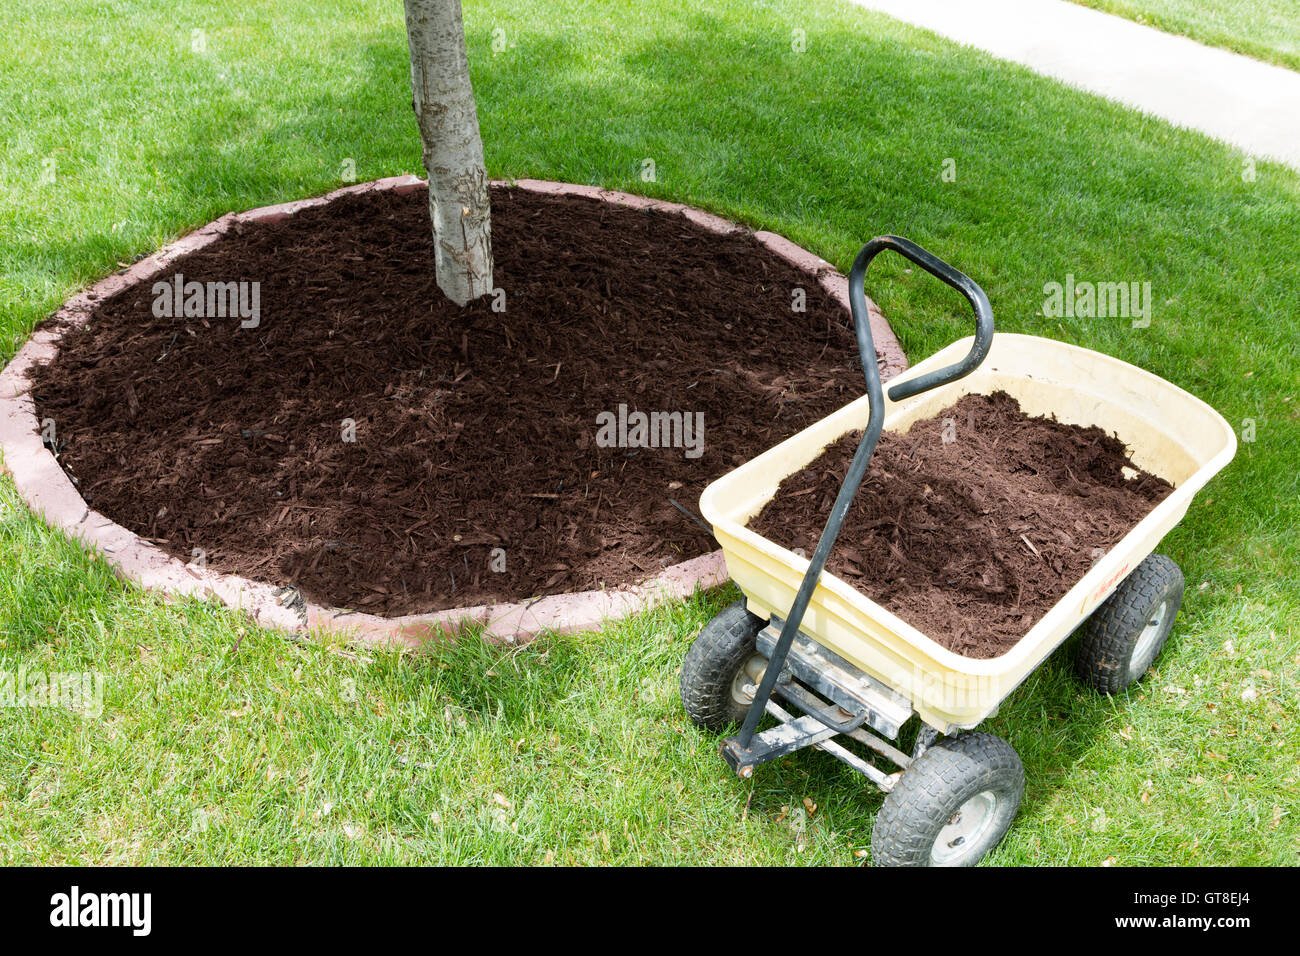 Mulch work around the trees growing in the backyard during springtime with a small yellow metal wheelbarrow full of organic mulc Stock Photo